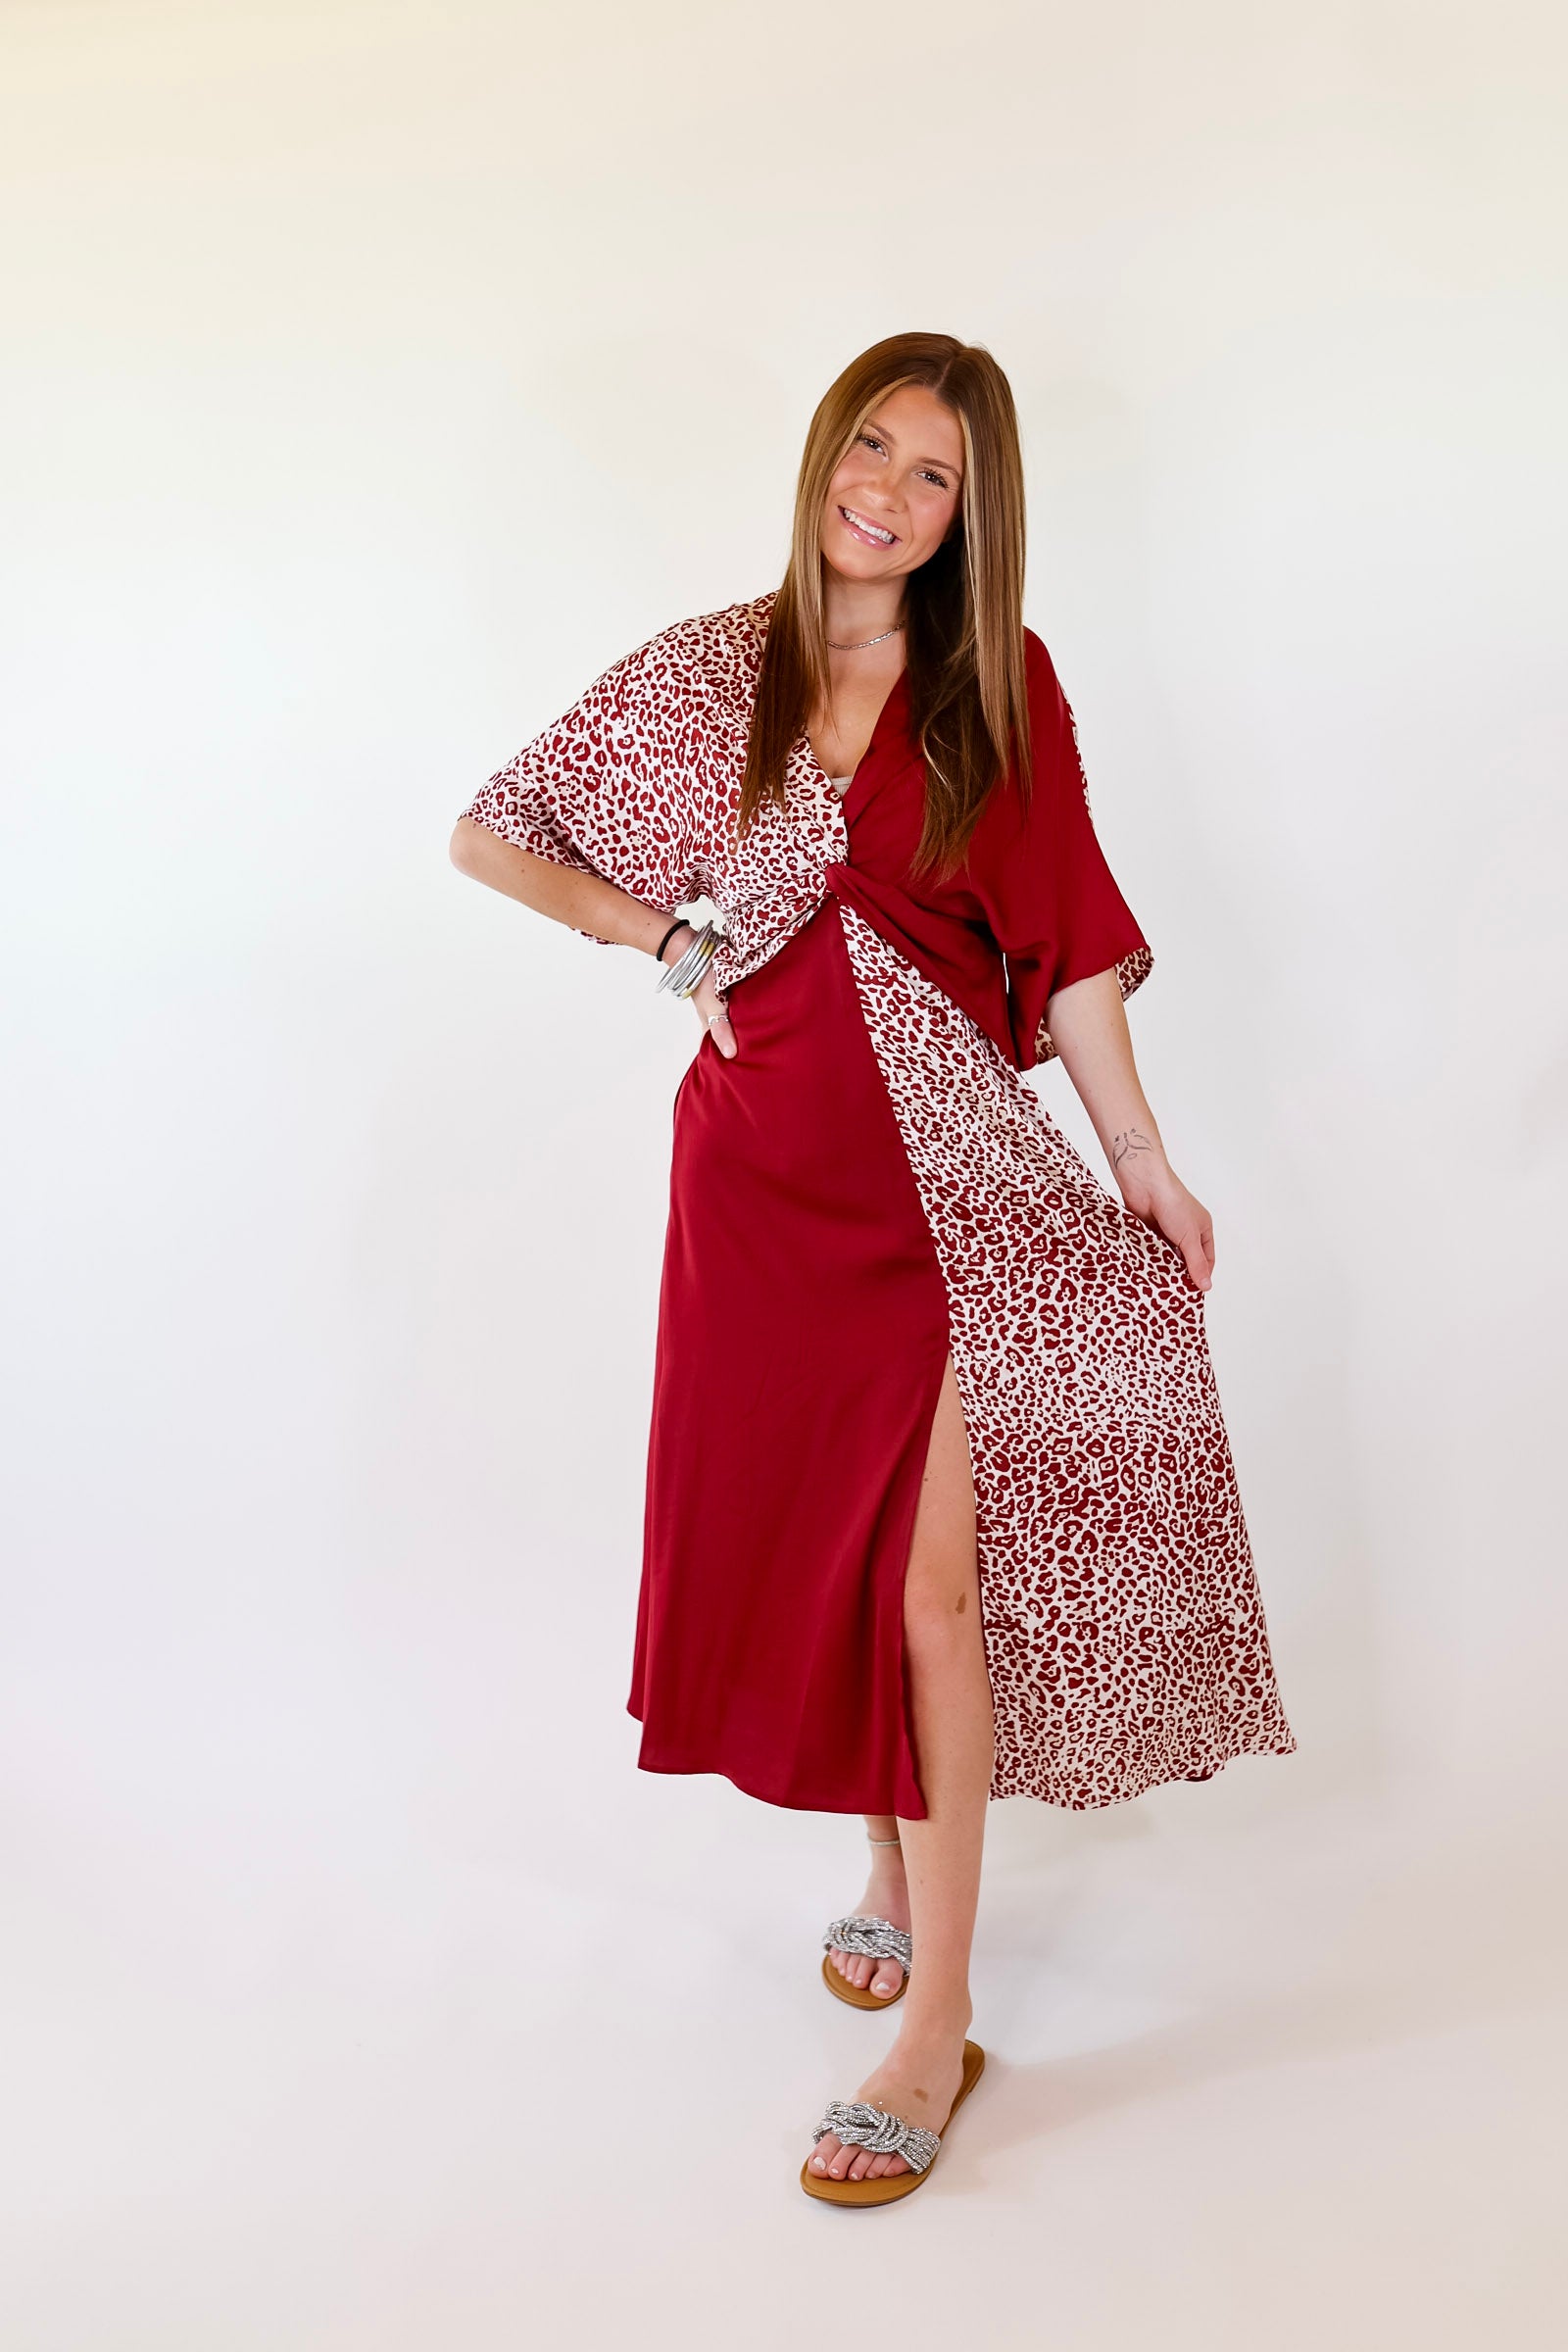 Take My Breath Away Front Knot Leopard Print Block Midi Dress in Maroon - Giddy Up Glamour Boutique